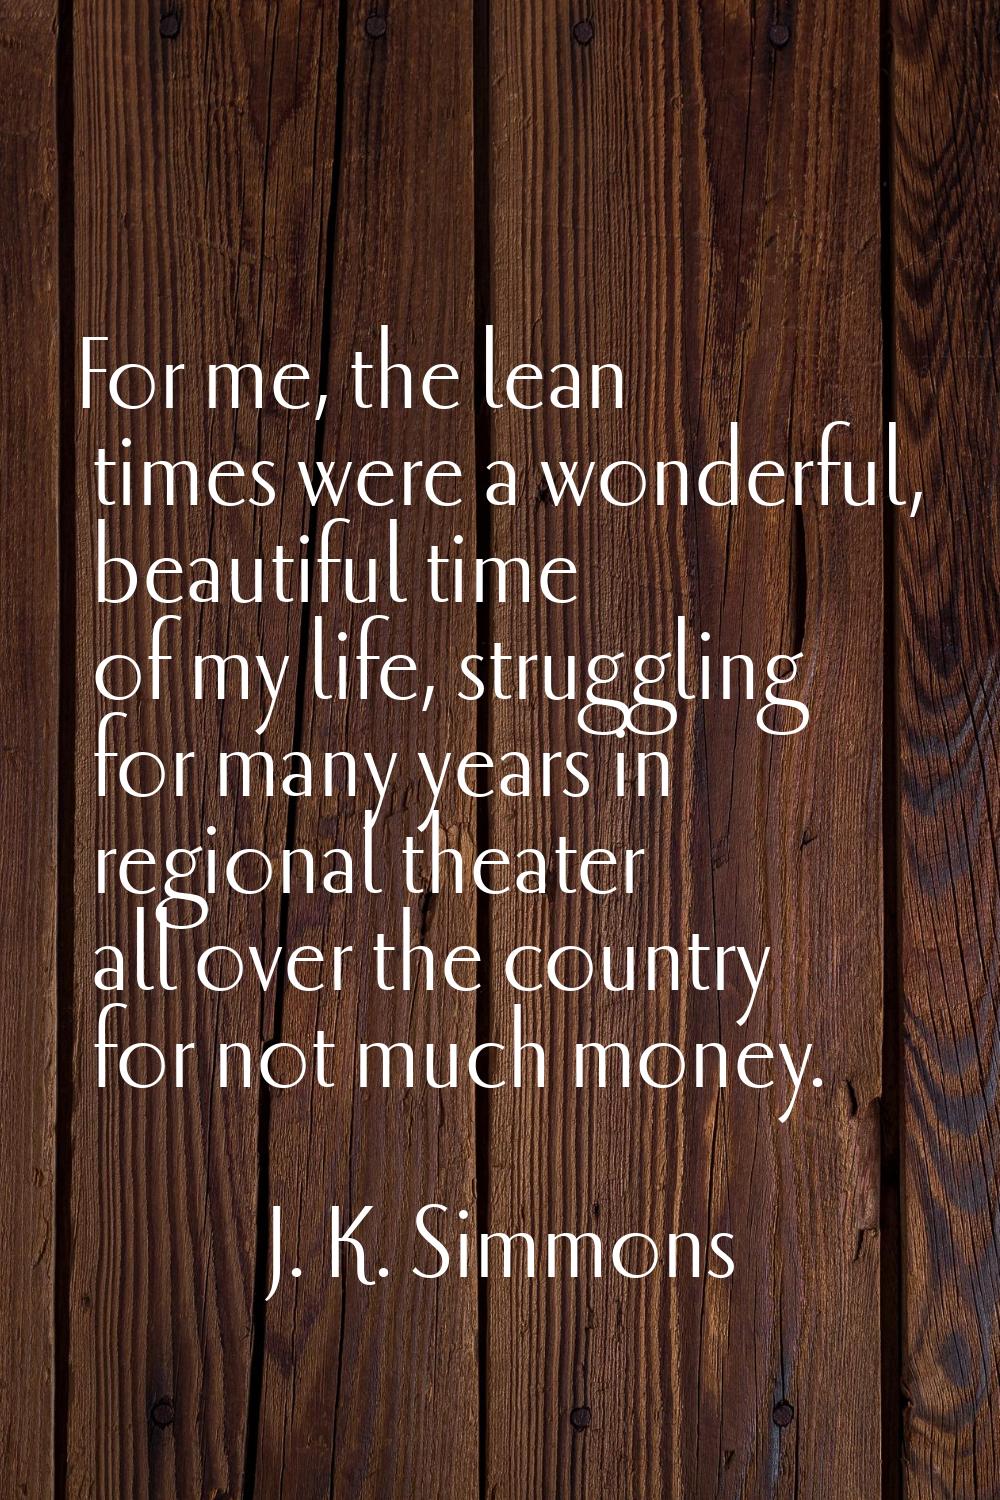 For me, the lean times were a wonderful, beautiful time of my life, struggling for many years in re